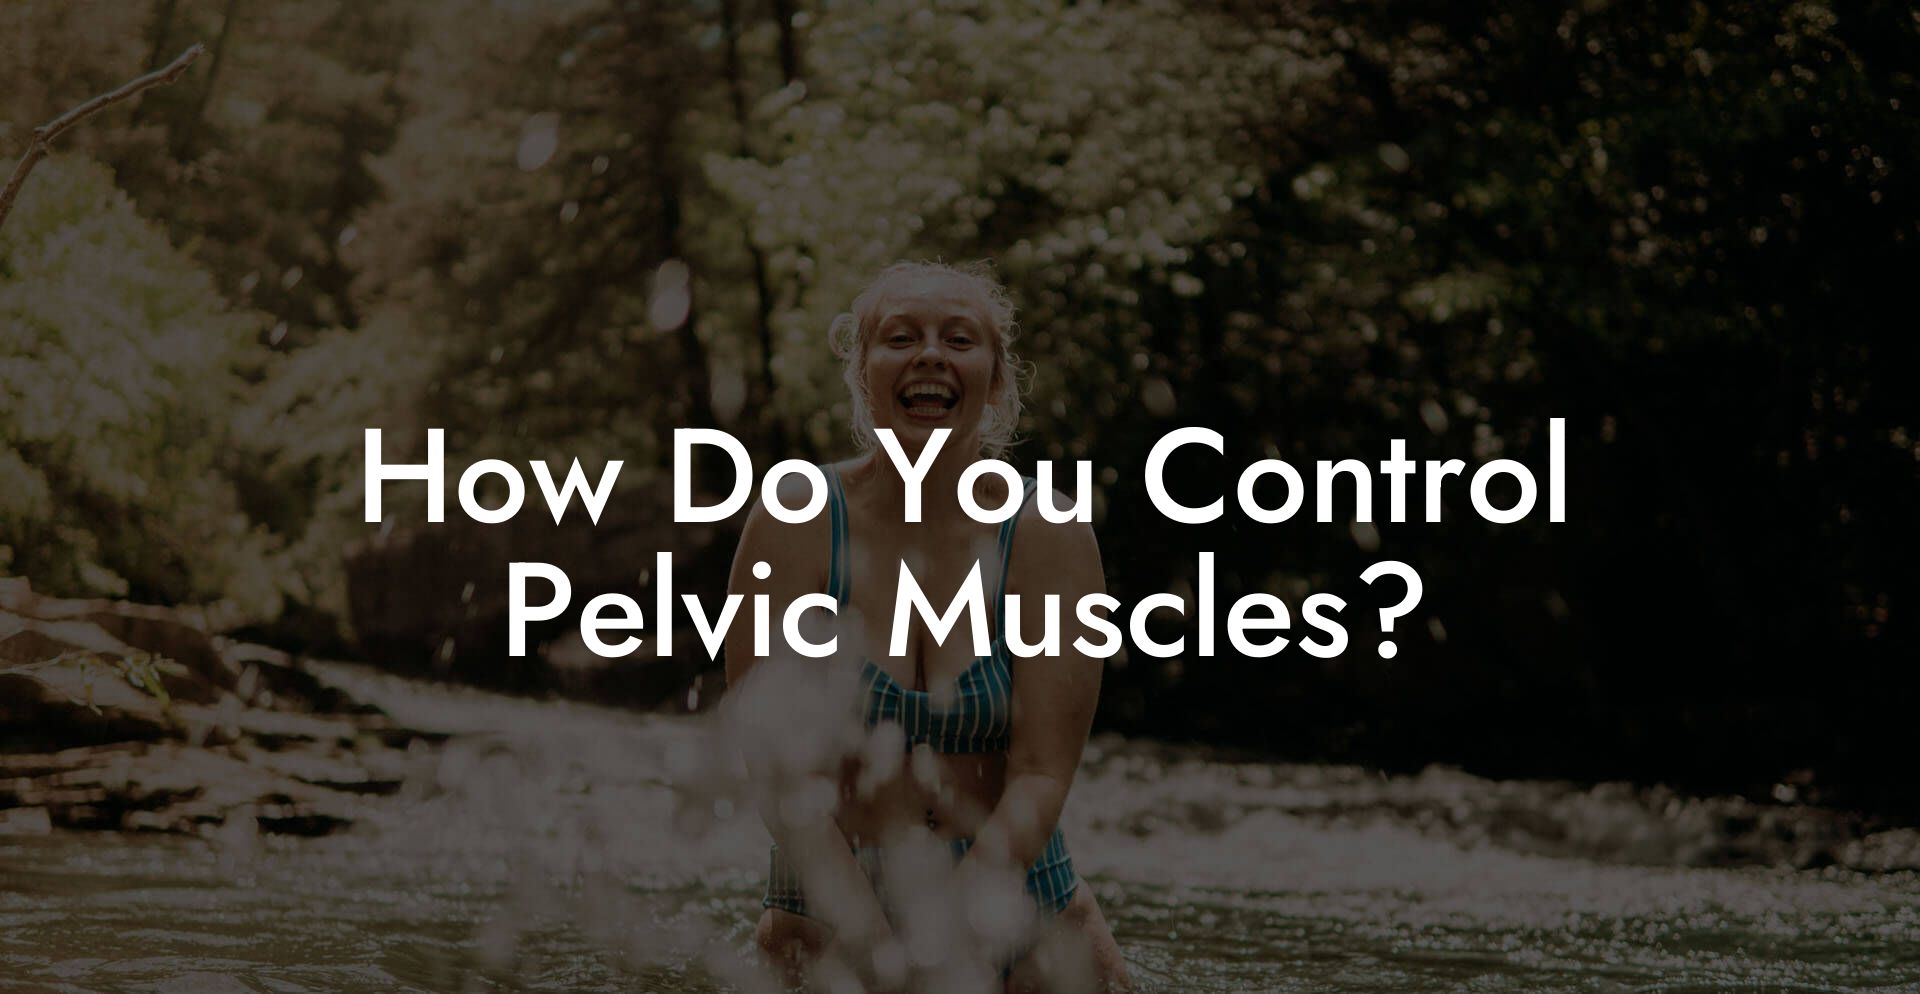 How Do You Control Pelvic Muscles?